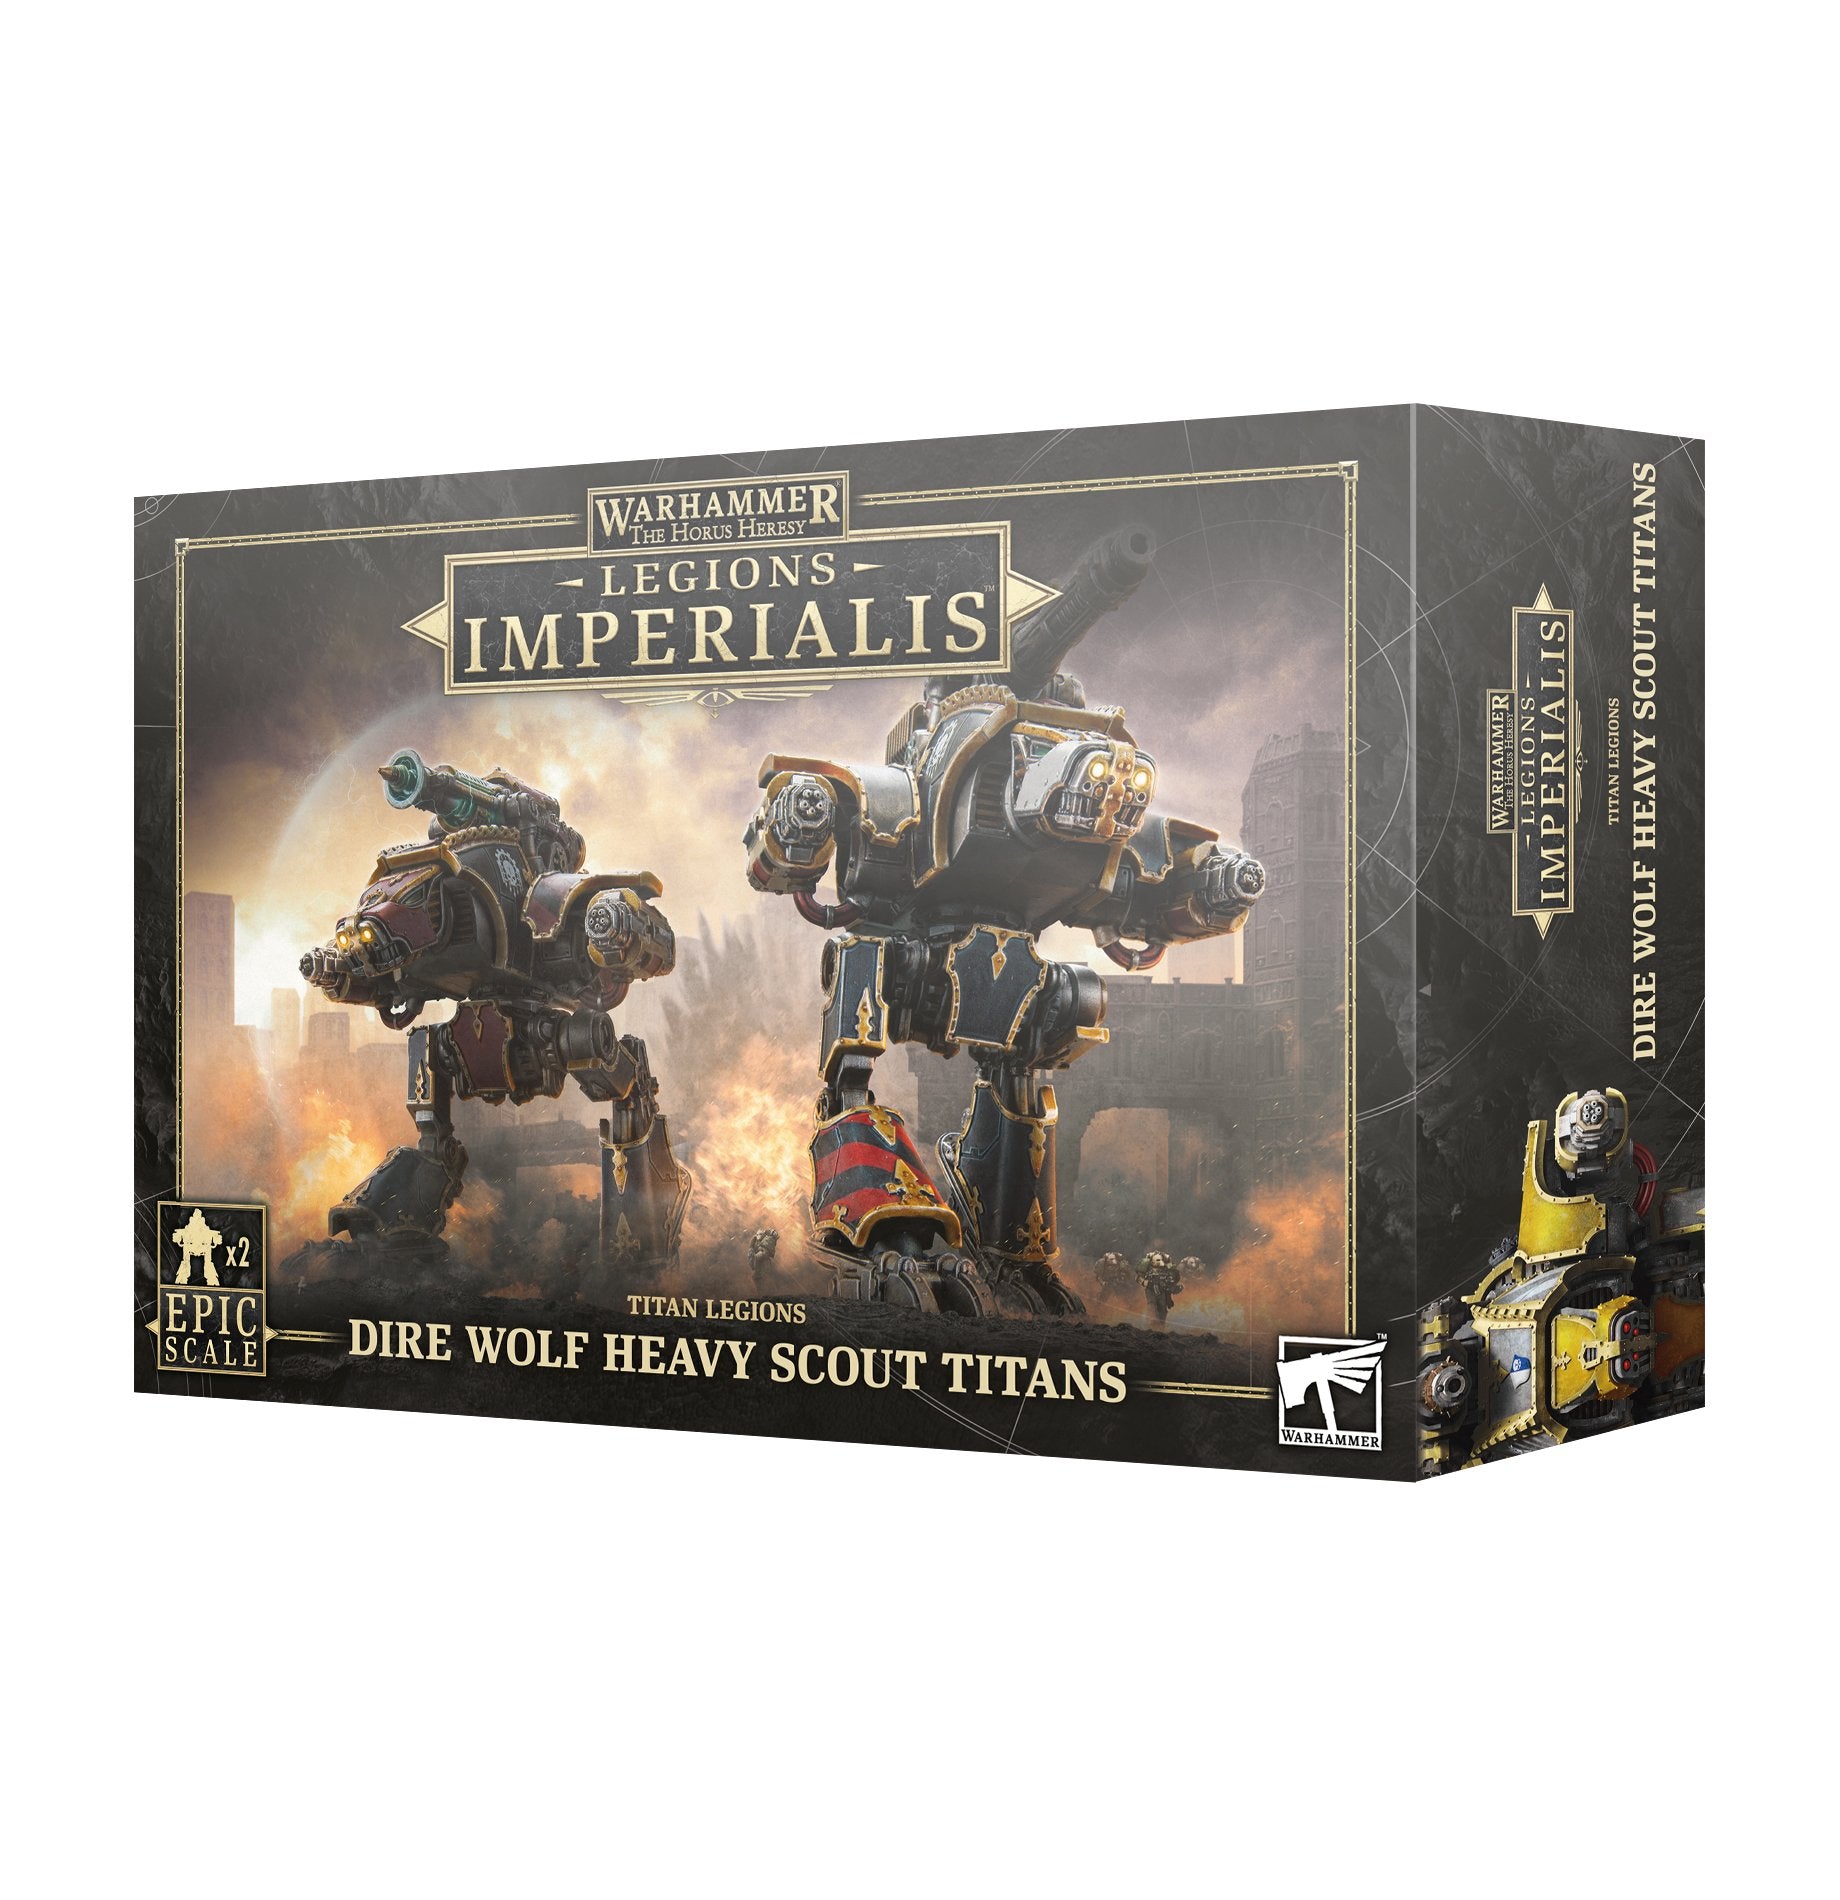 Legions Imperialis: Dire Wolf Heavy Scout Titans - Release Date 13/4/24 - Loaded Dice